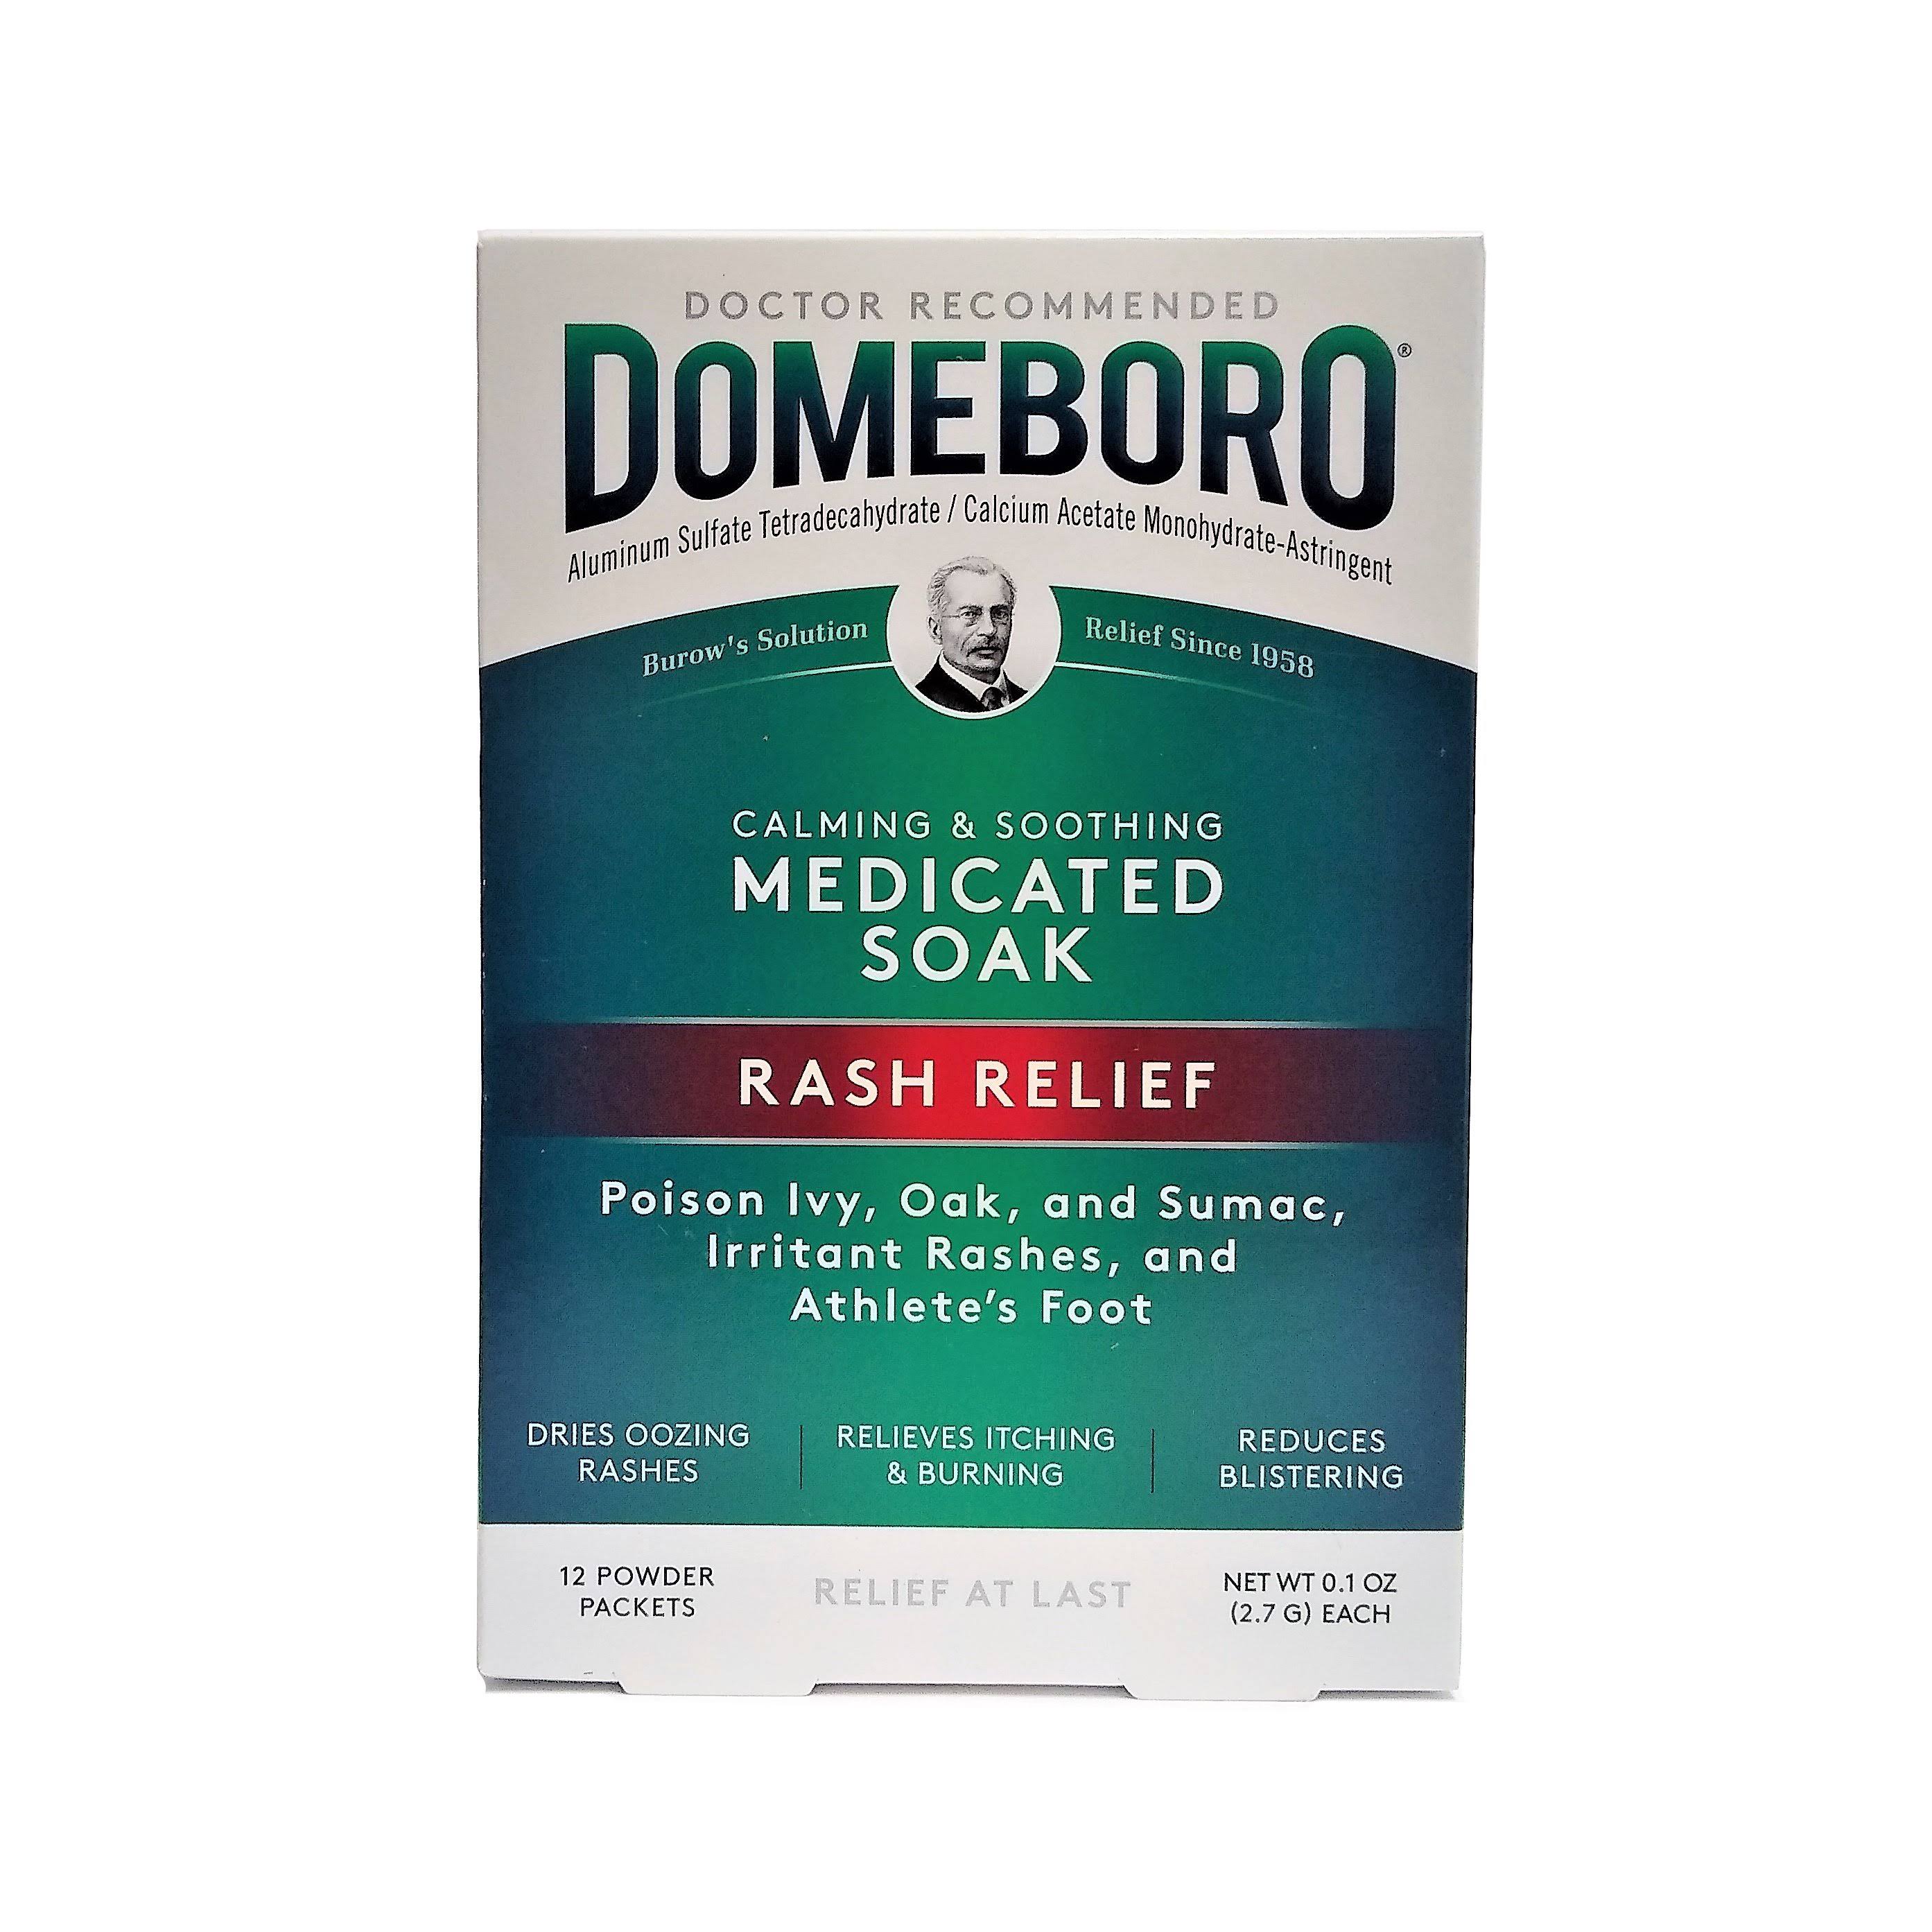 Domeboro Astringent Solution - 12 Powder Packets